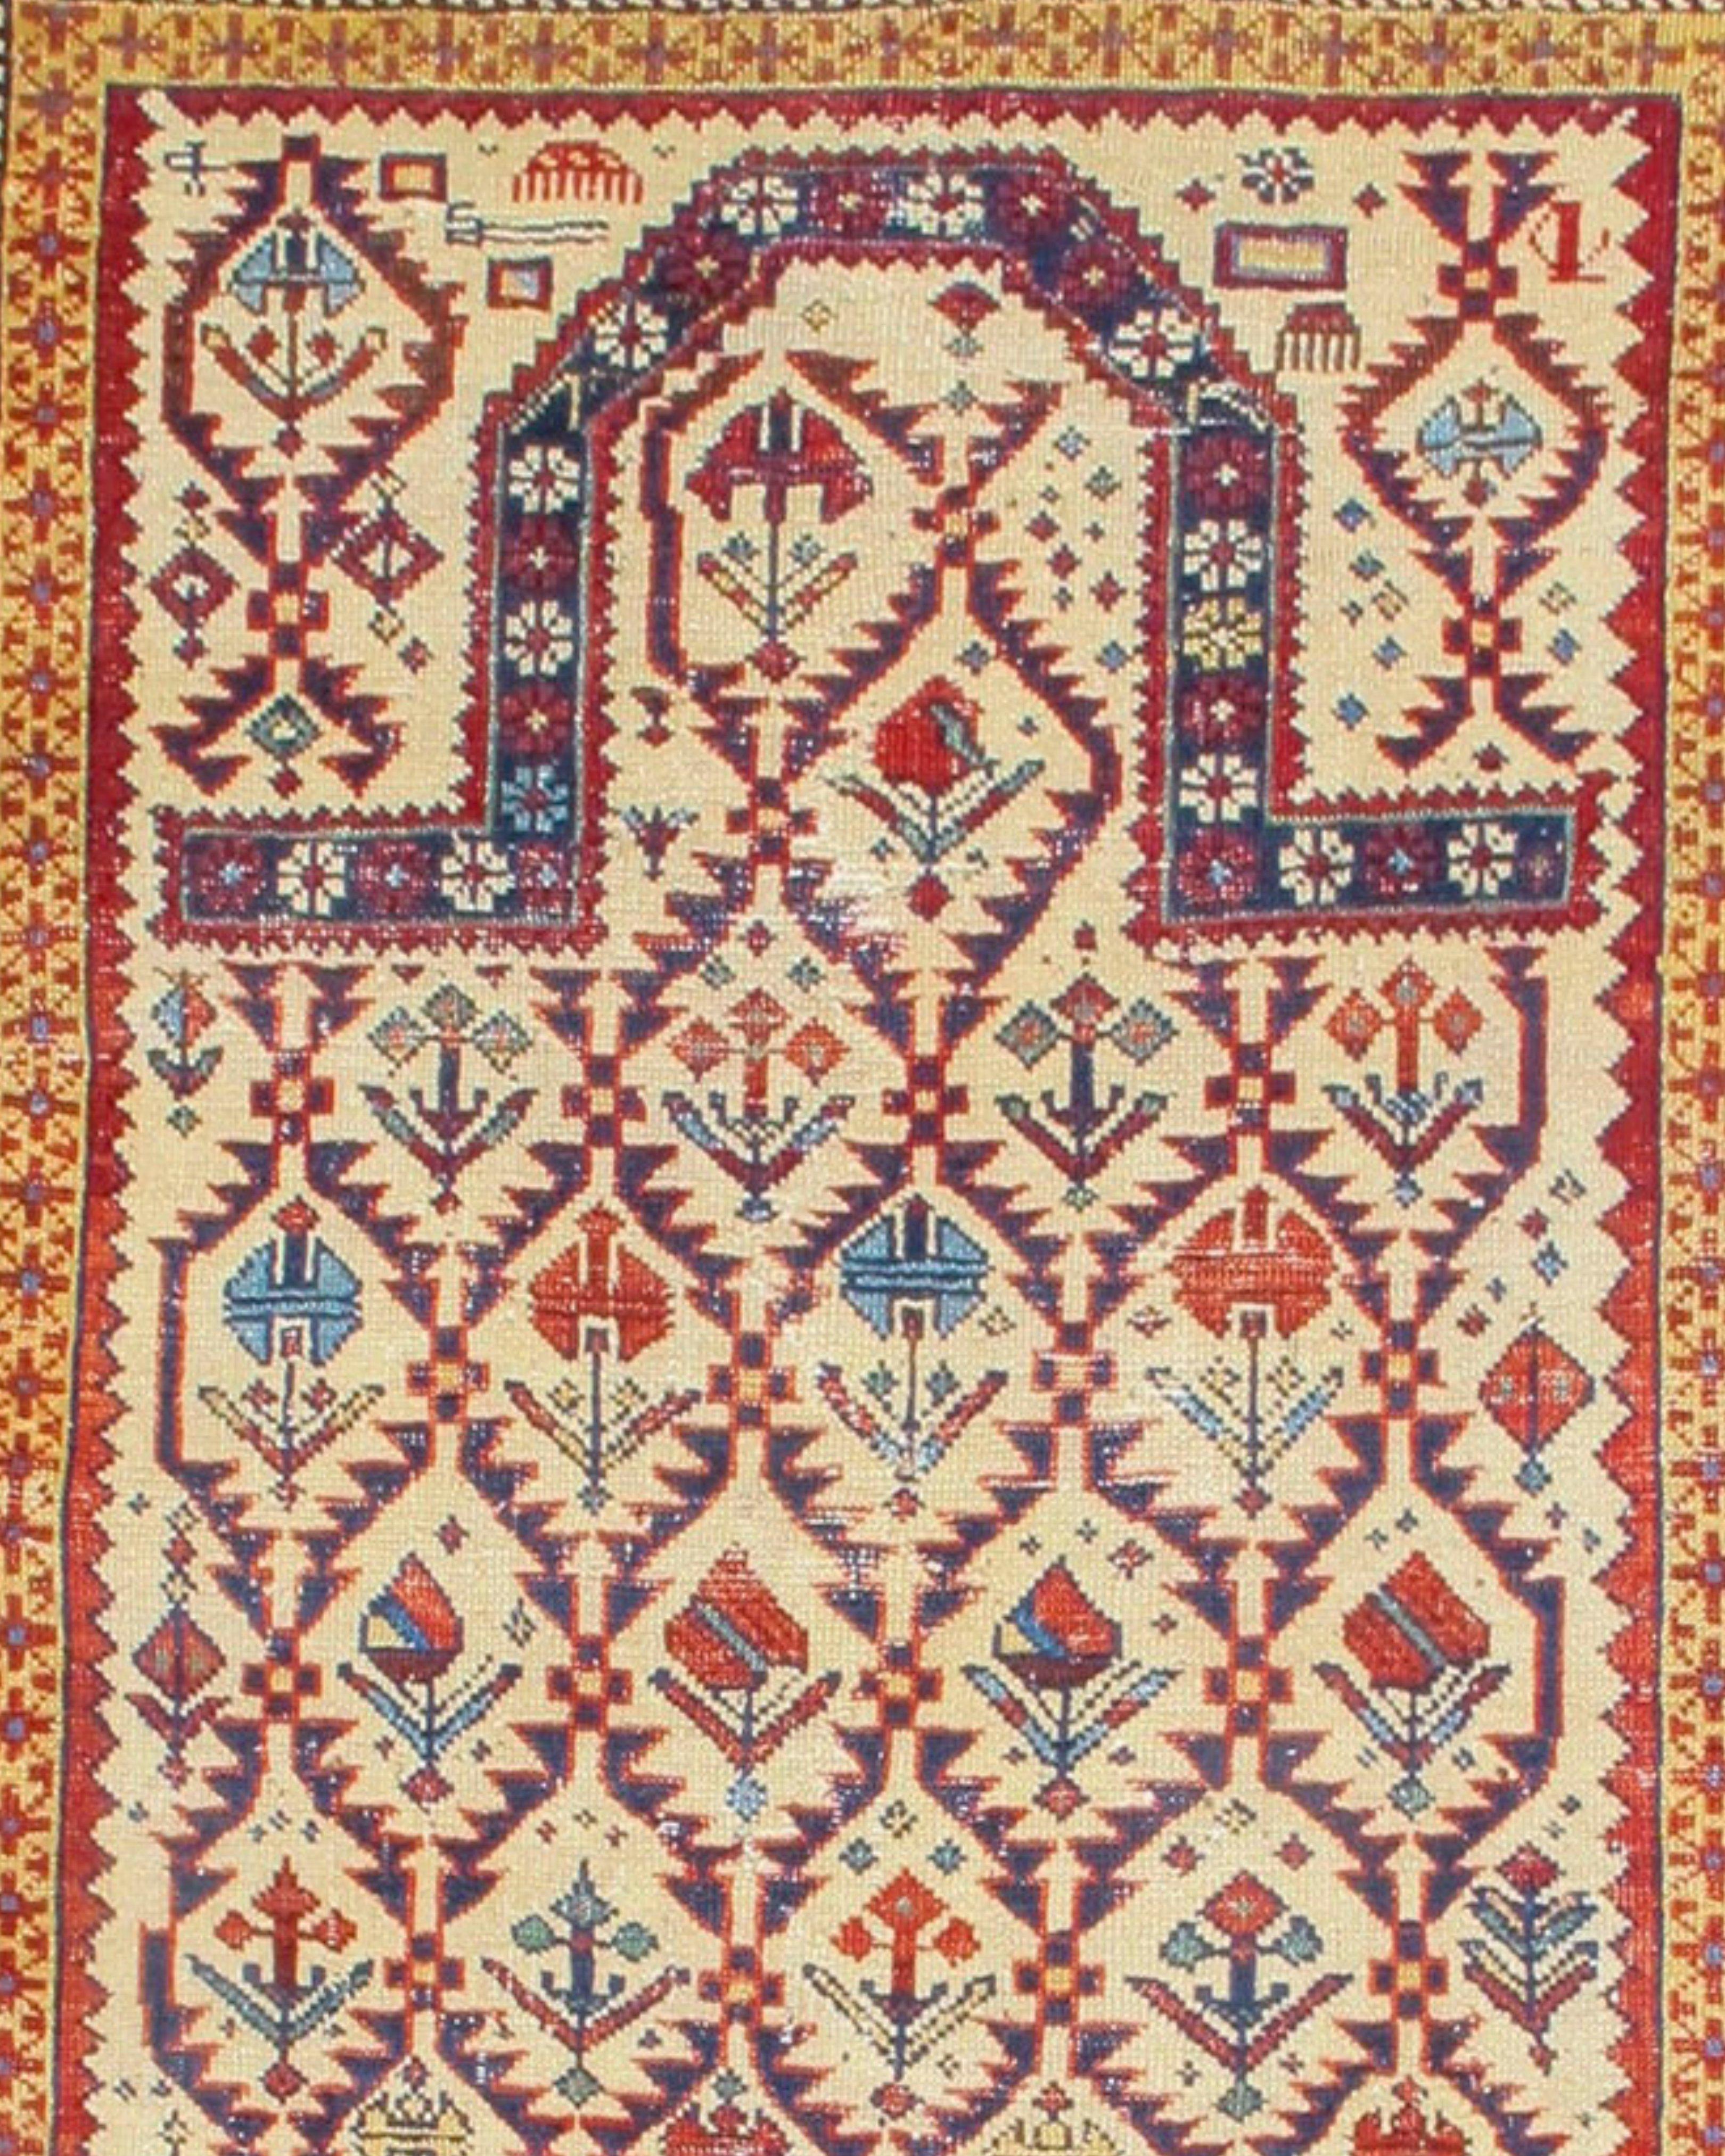 Wool Antique Persian Senneh Kilim Rug, Late 19th Century For Sale